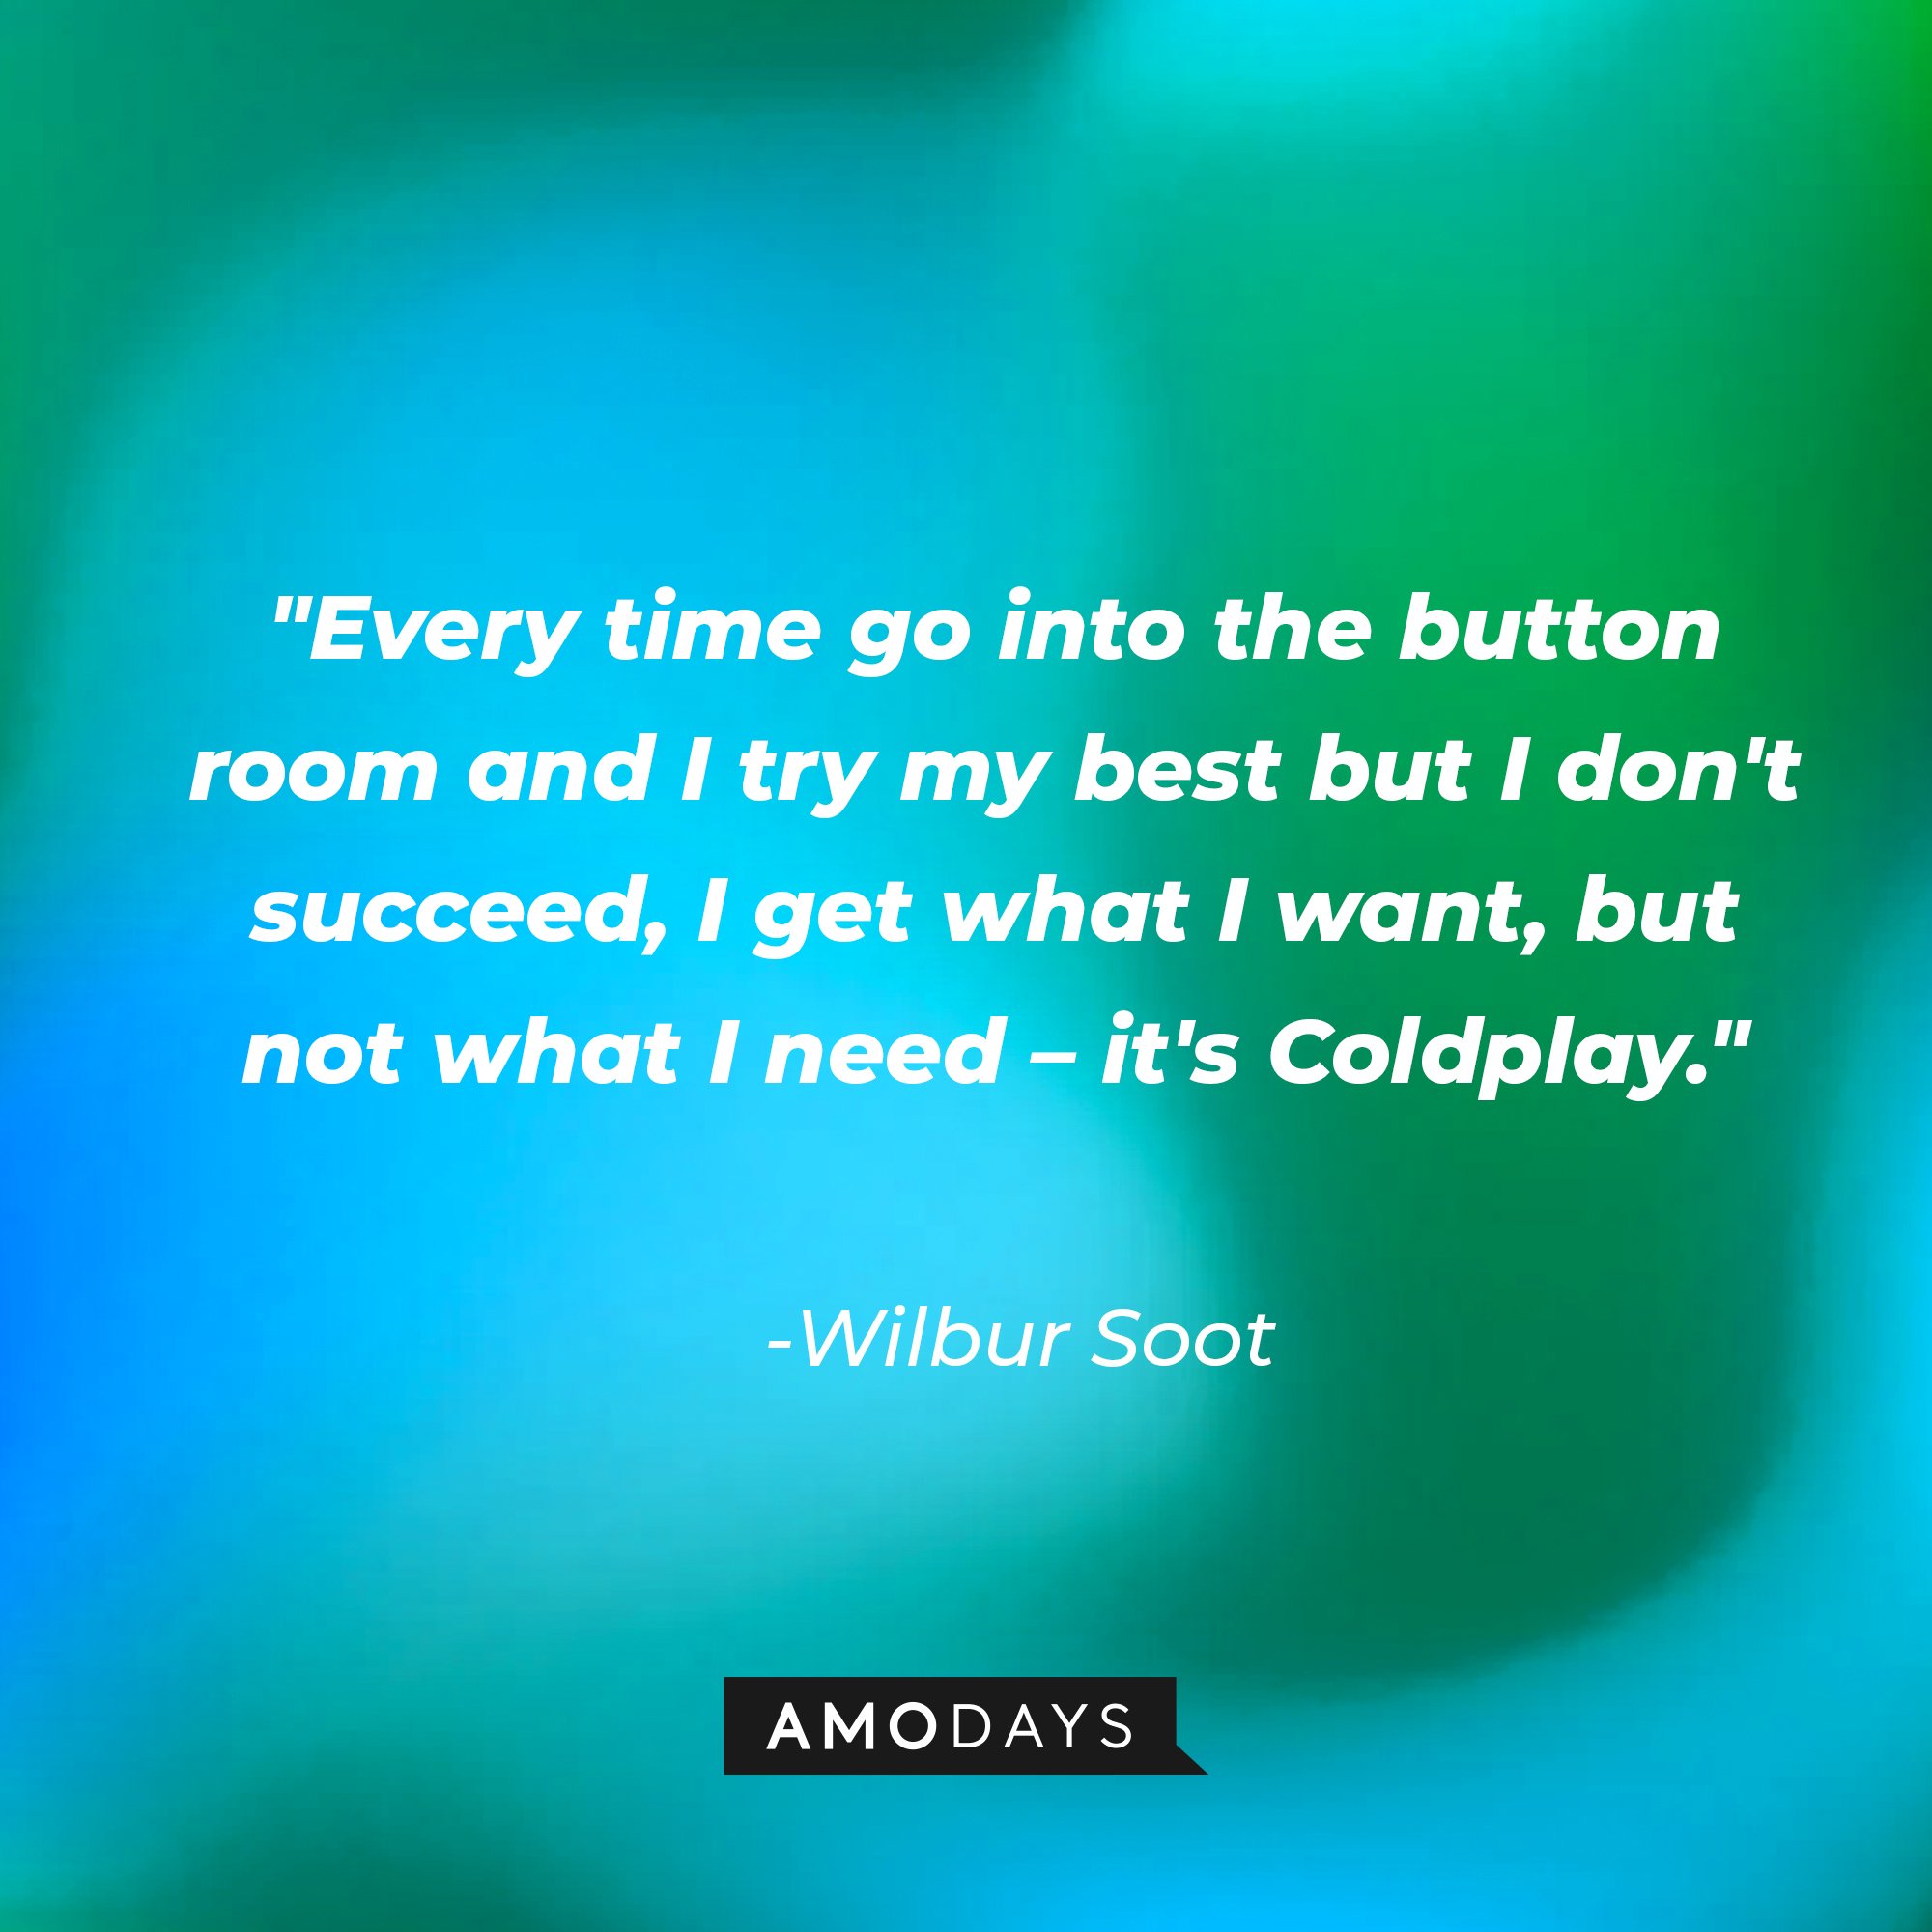 Wilbur Soot's quote: "Every time go into the button room and I try my best but I don't succeed, I get what I want, but not what I need – it's Coldplay." | Image: AmoDays